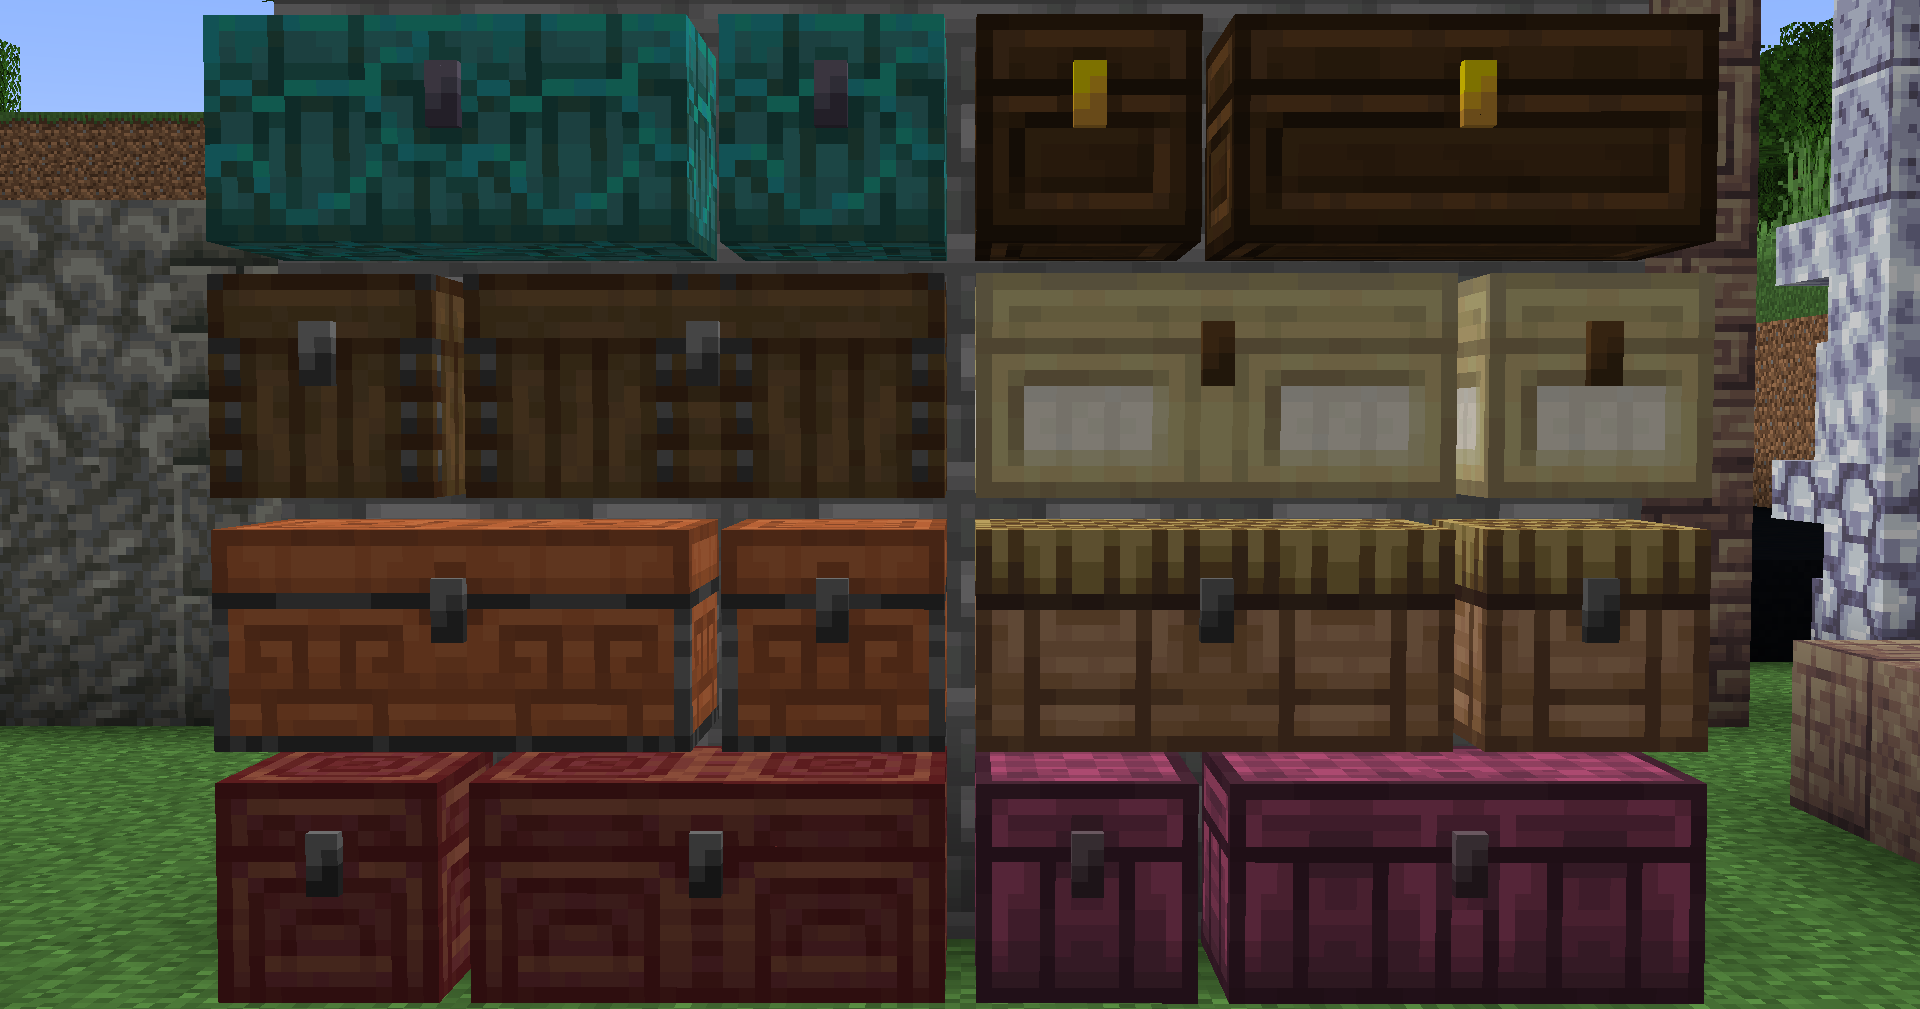 Adds custom crafting recipes for new unique chests from their respective wood types